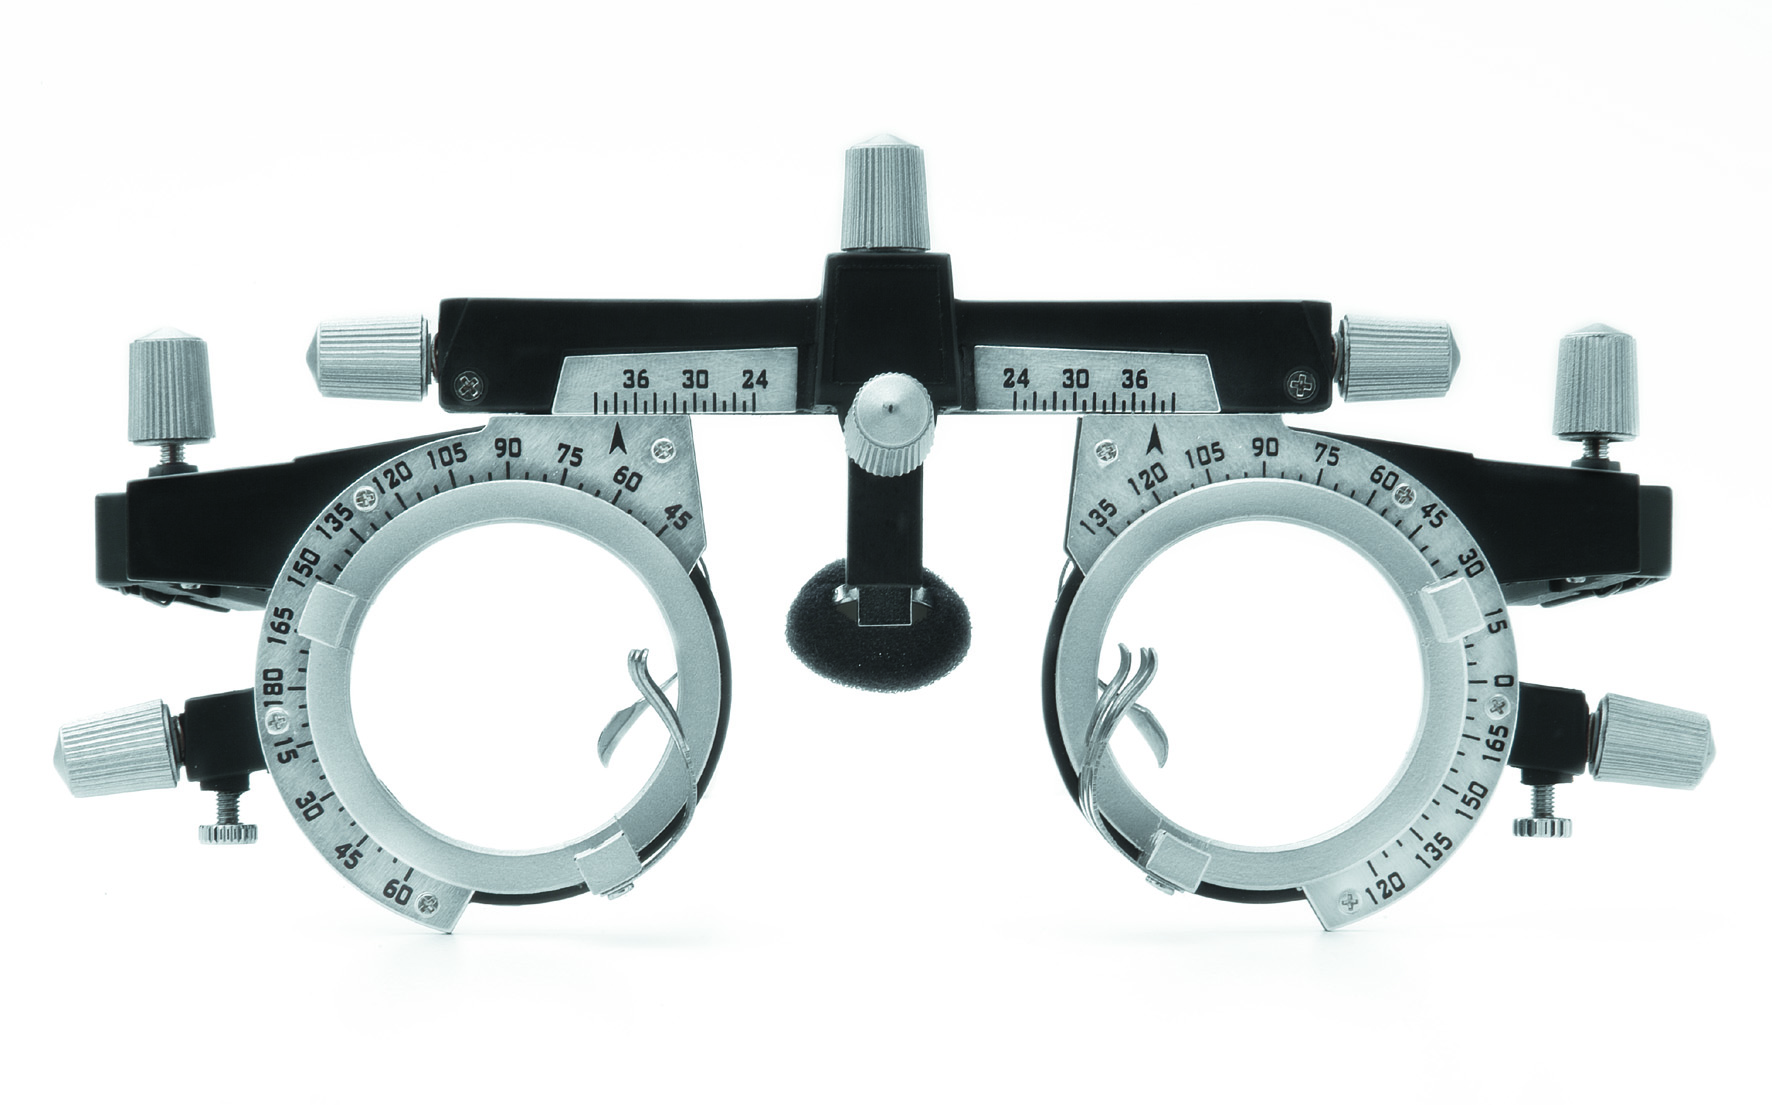 Ophthalmoscope & Focimeter & Trial Lens Sent